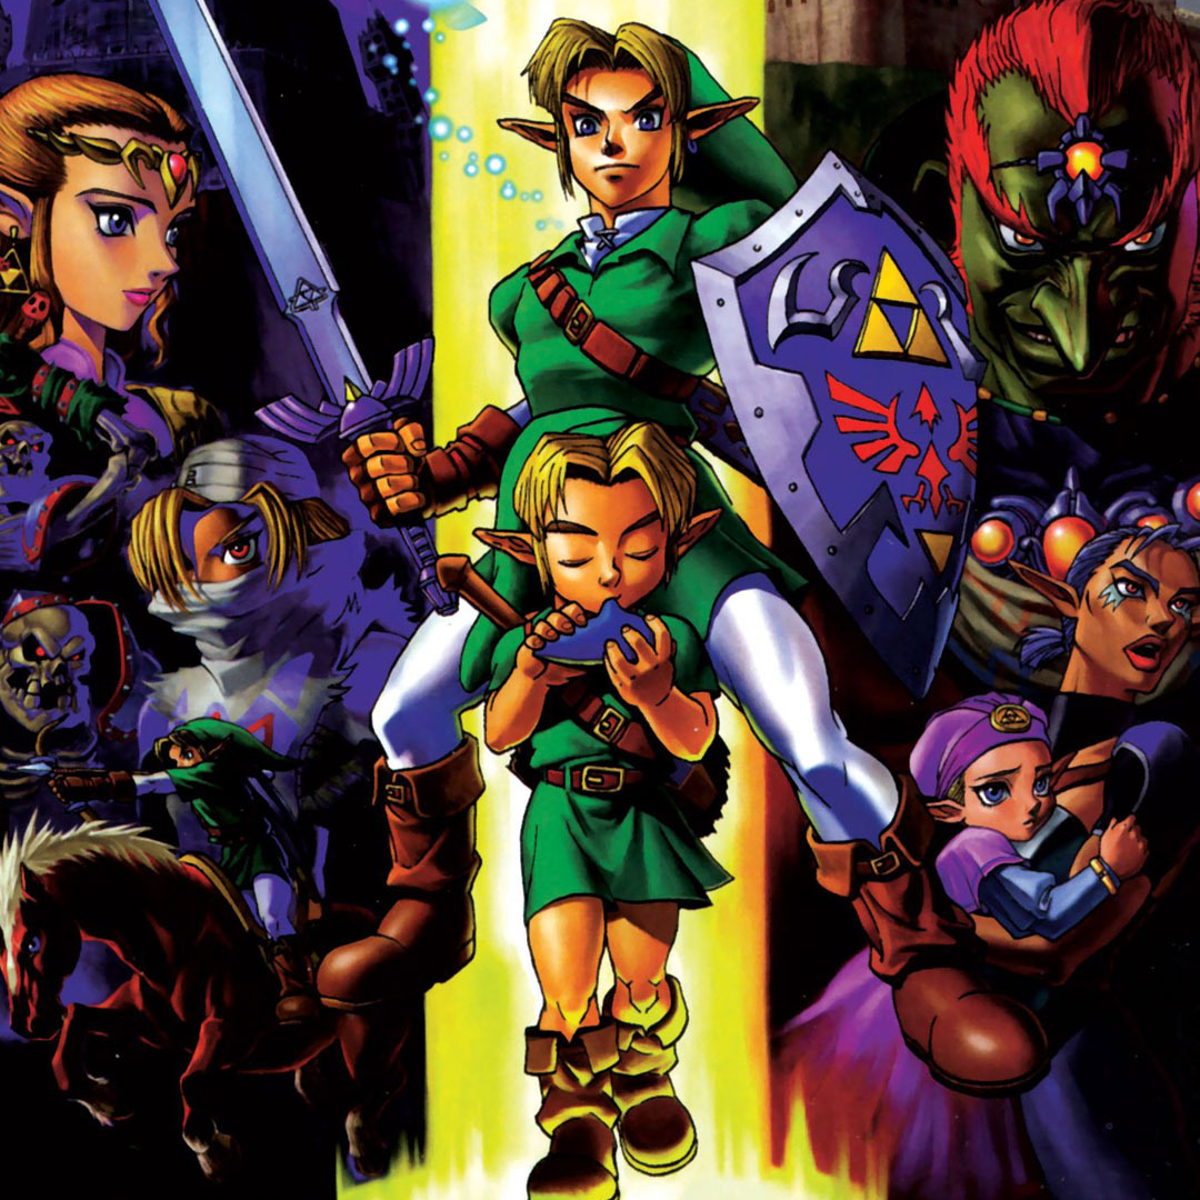 Links to the Past: The Development of Ocarina of Time, Part 3